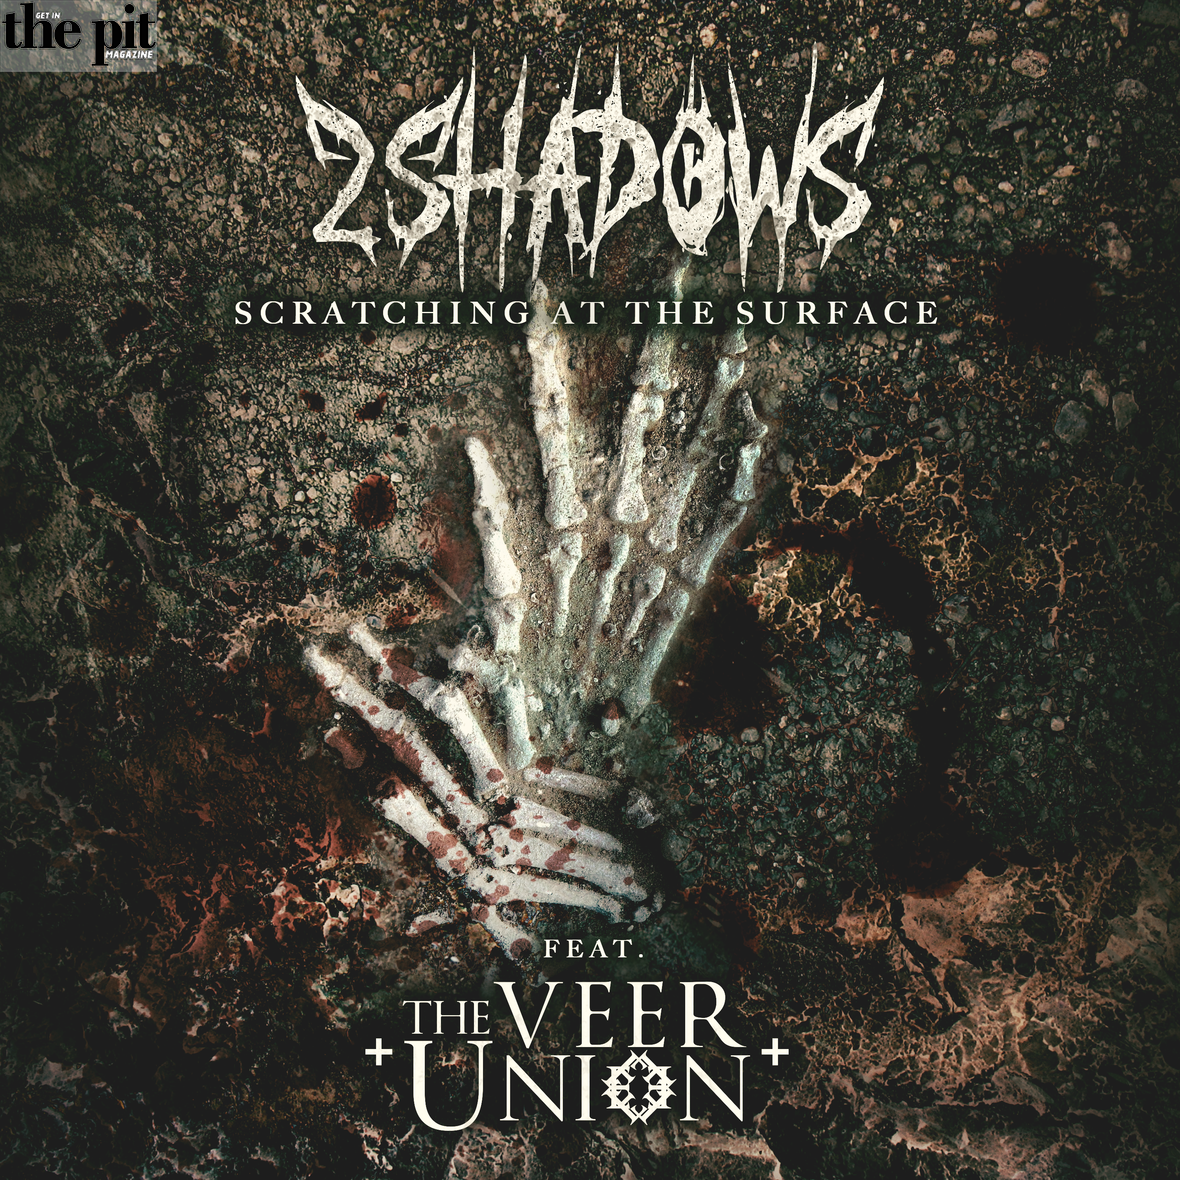 Album cover for 2 Shadows' "scratching at the surface" featuring the veer union, showing a skeleton hand imprint on a textured, earthy background.